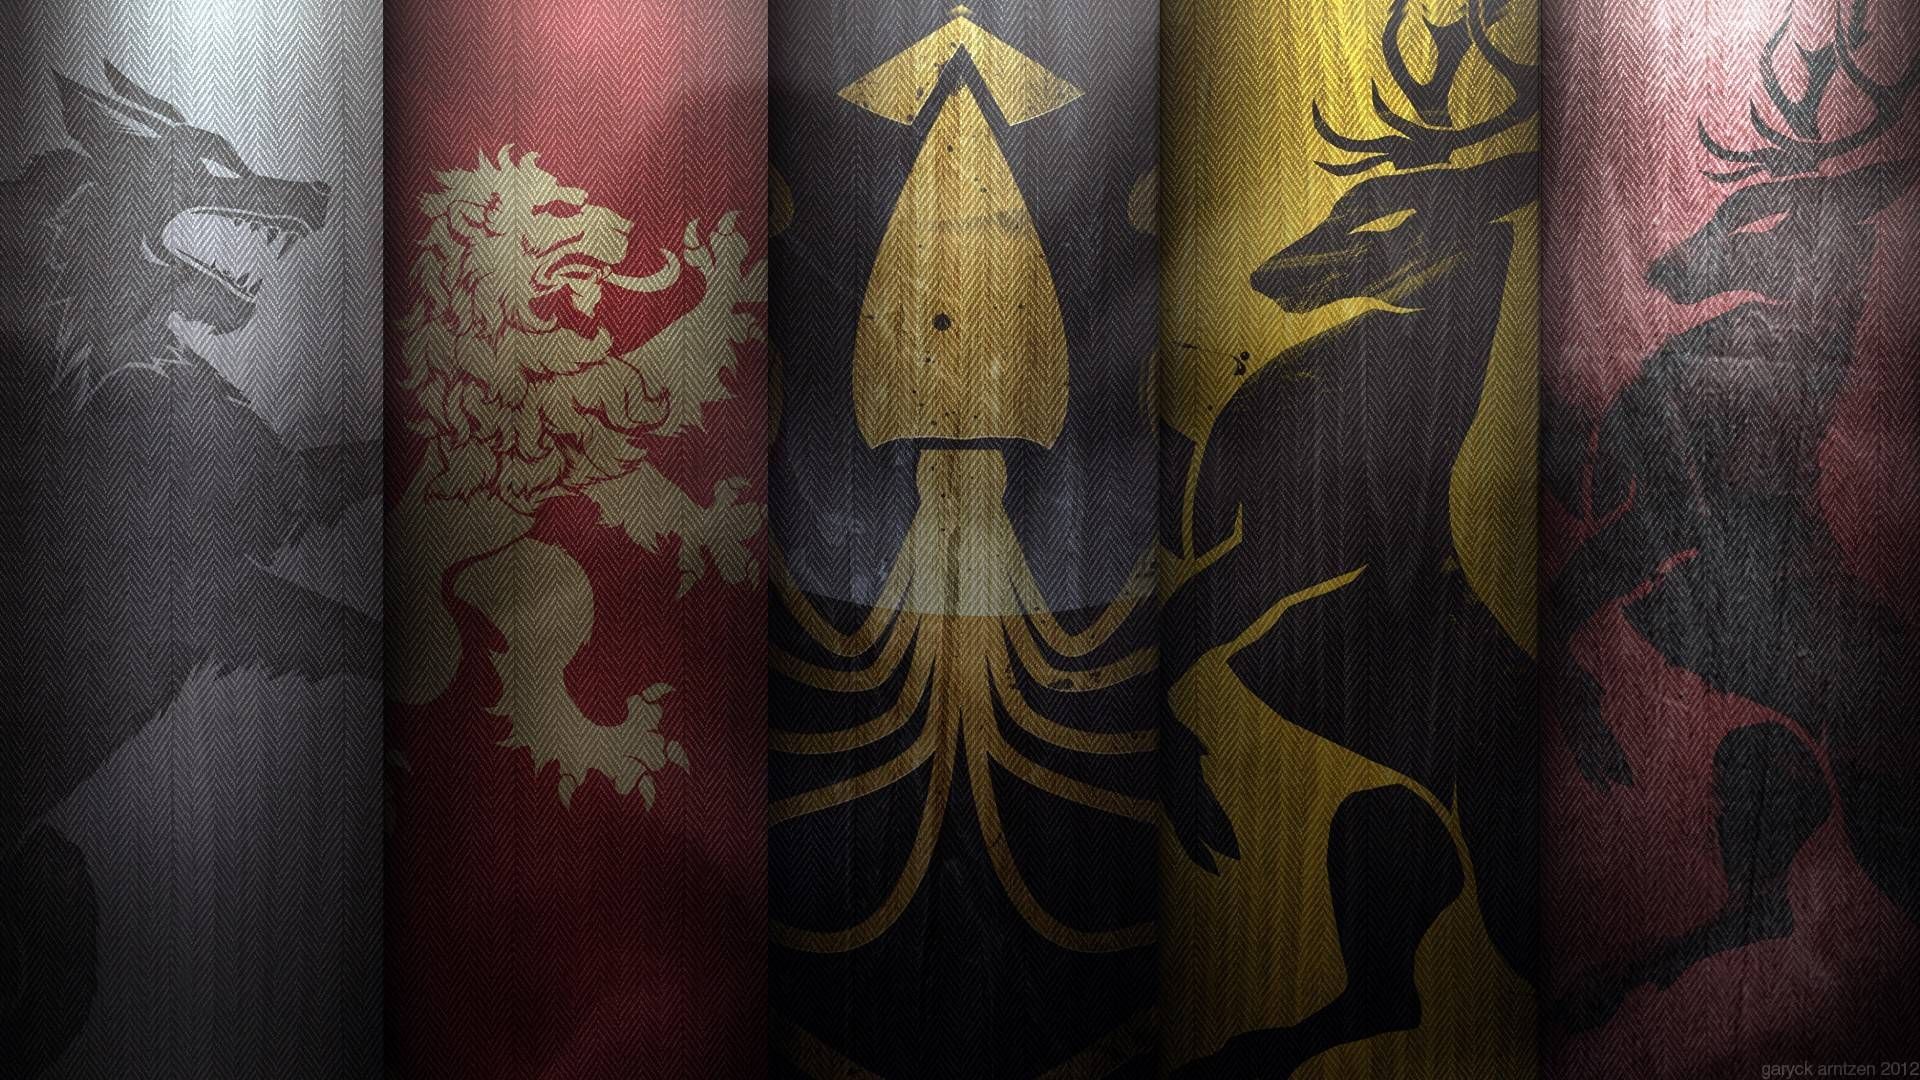 12000x6660] [983 image] [1920x1080] My wallpaper Collection. Zelda Avatar ASOIAF and. iPad mini wallpaper, Game of thrones merchandise, HD wallpaper for laptop